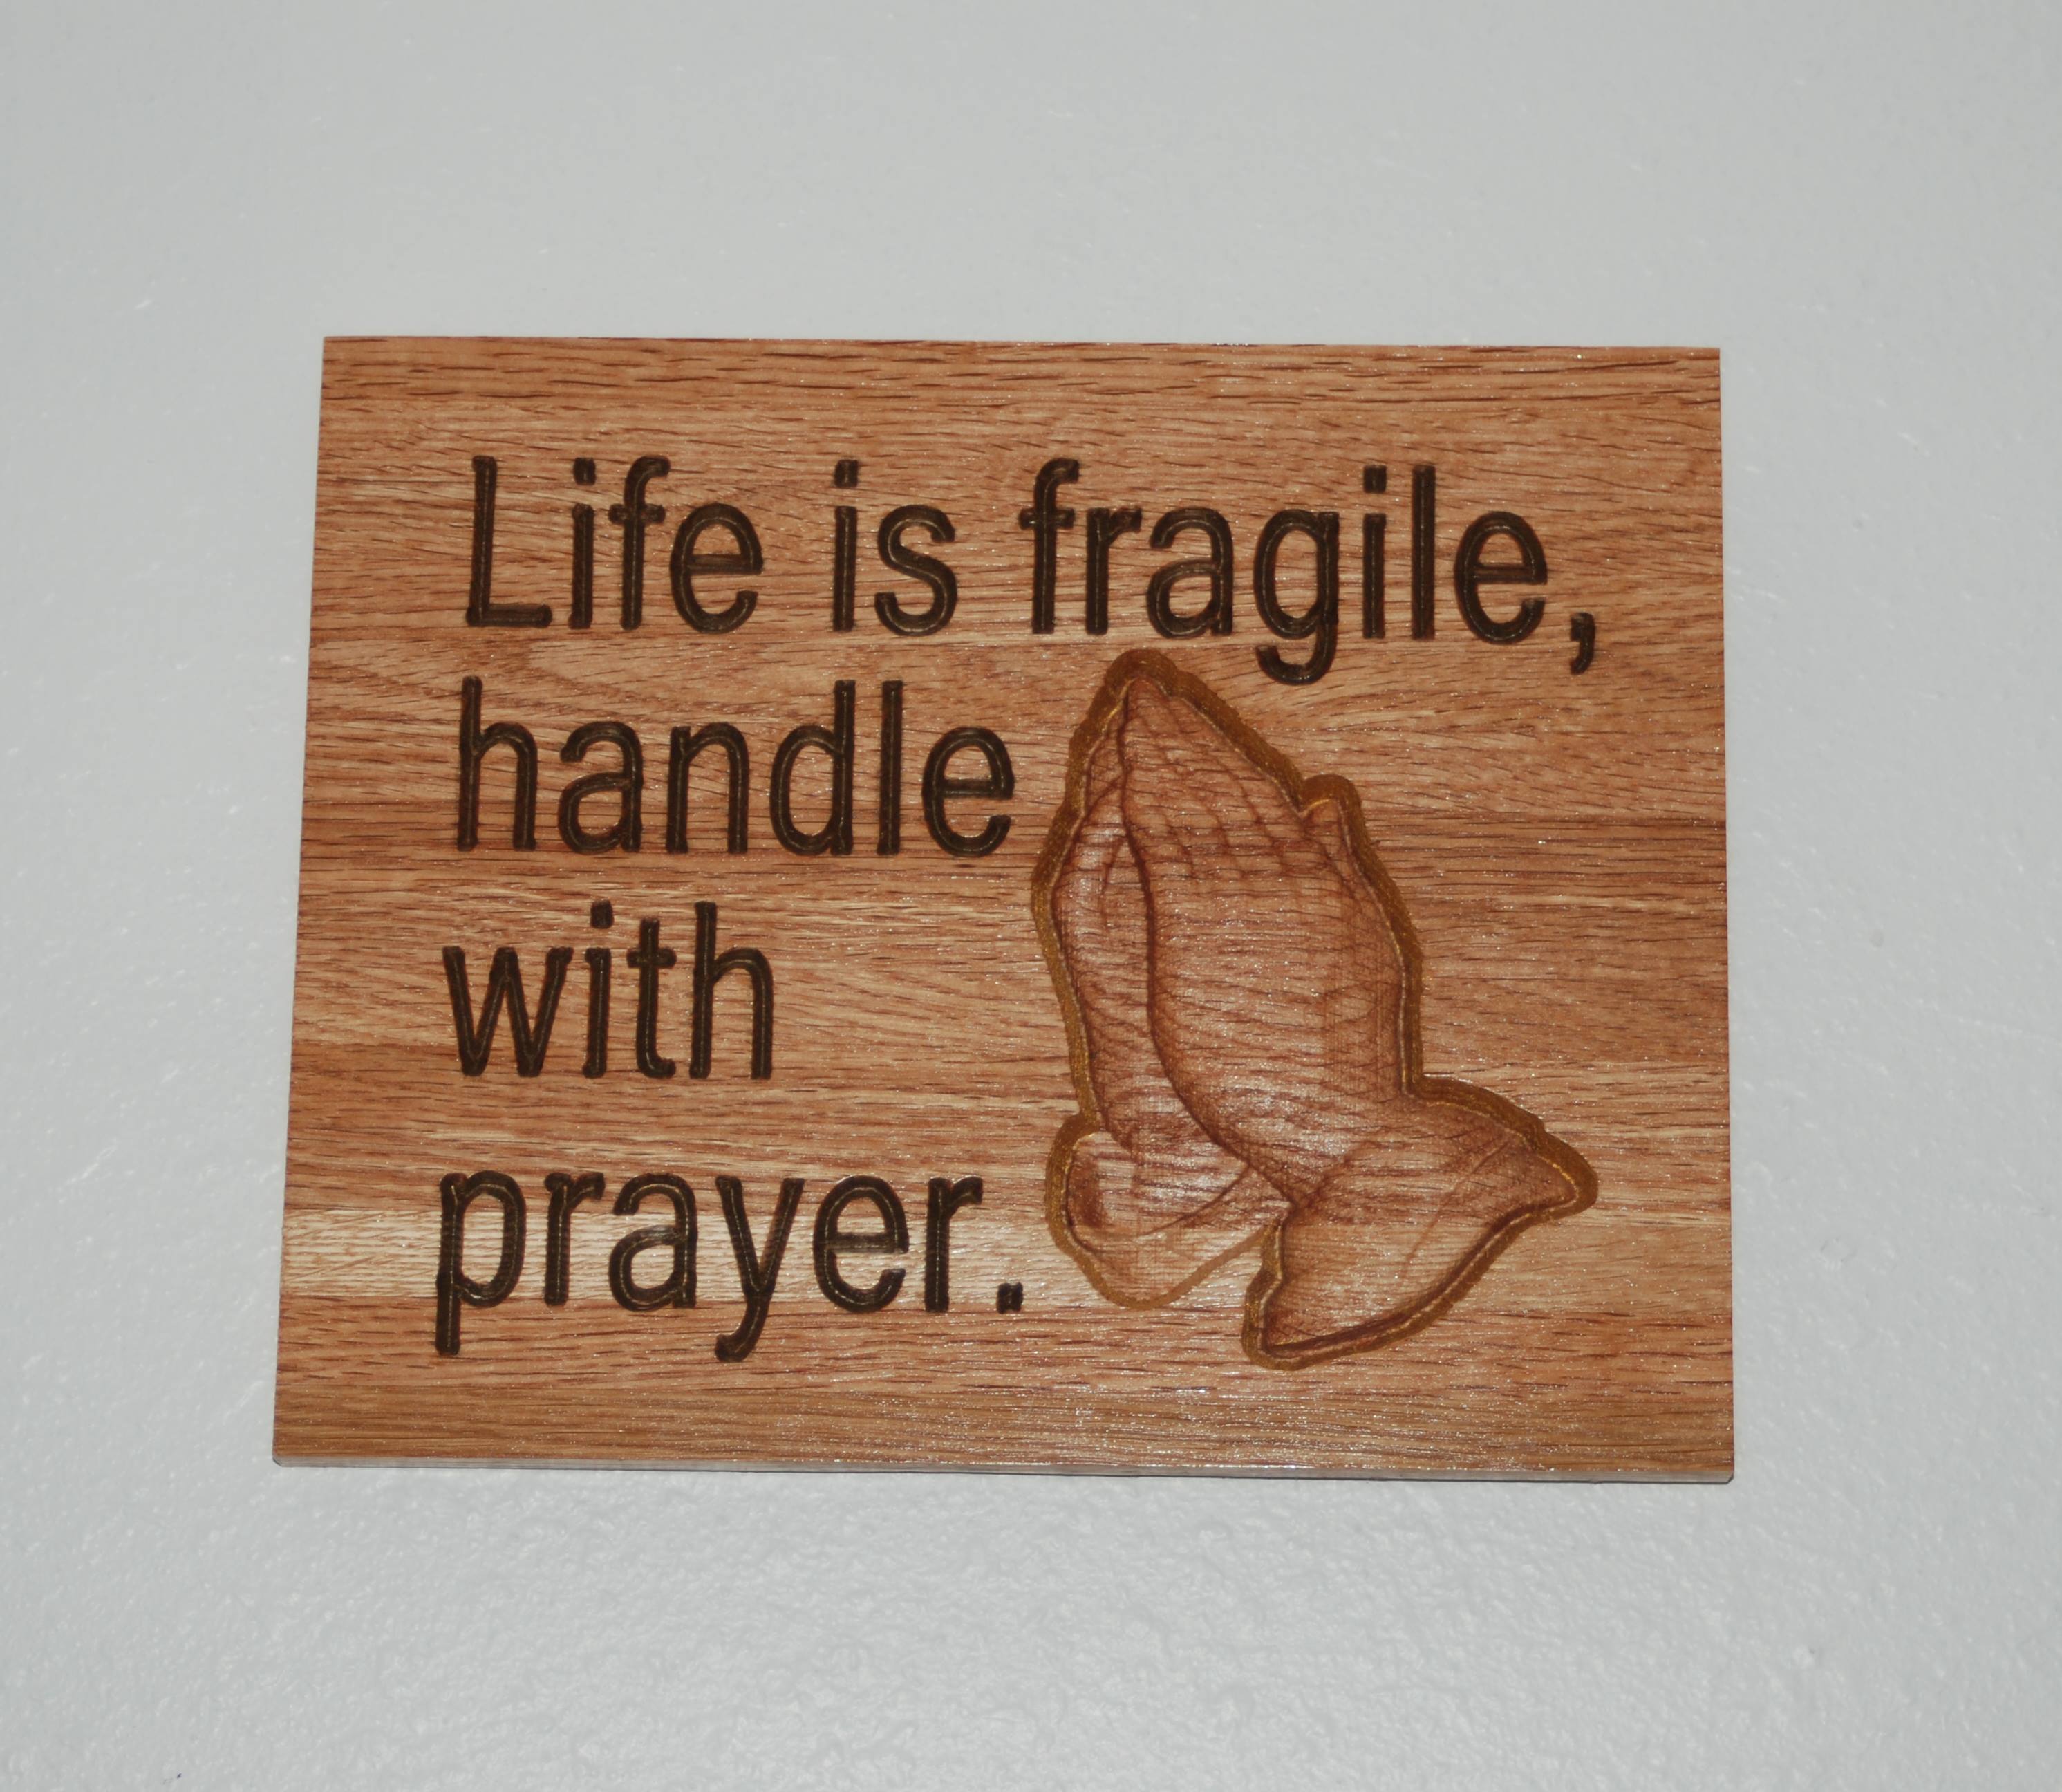 Life is fragile, handle with prayer.